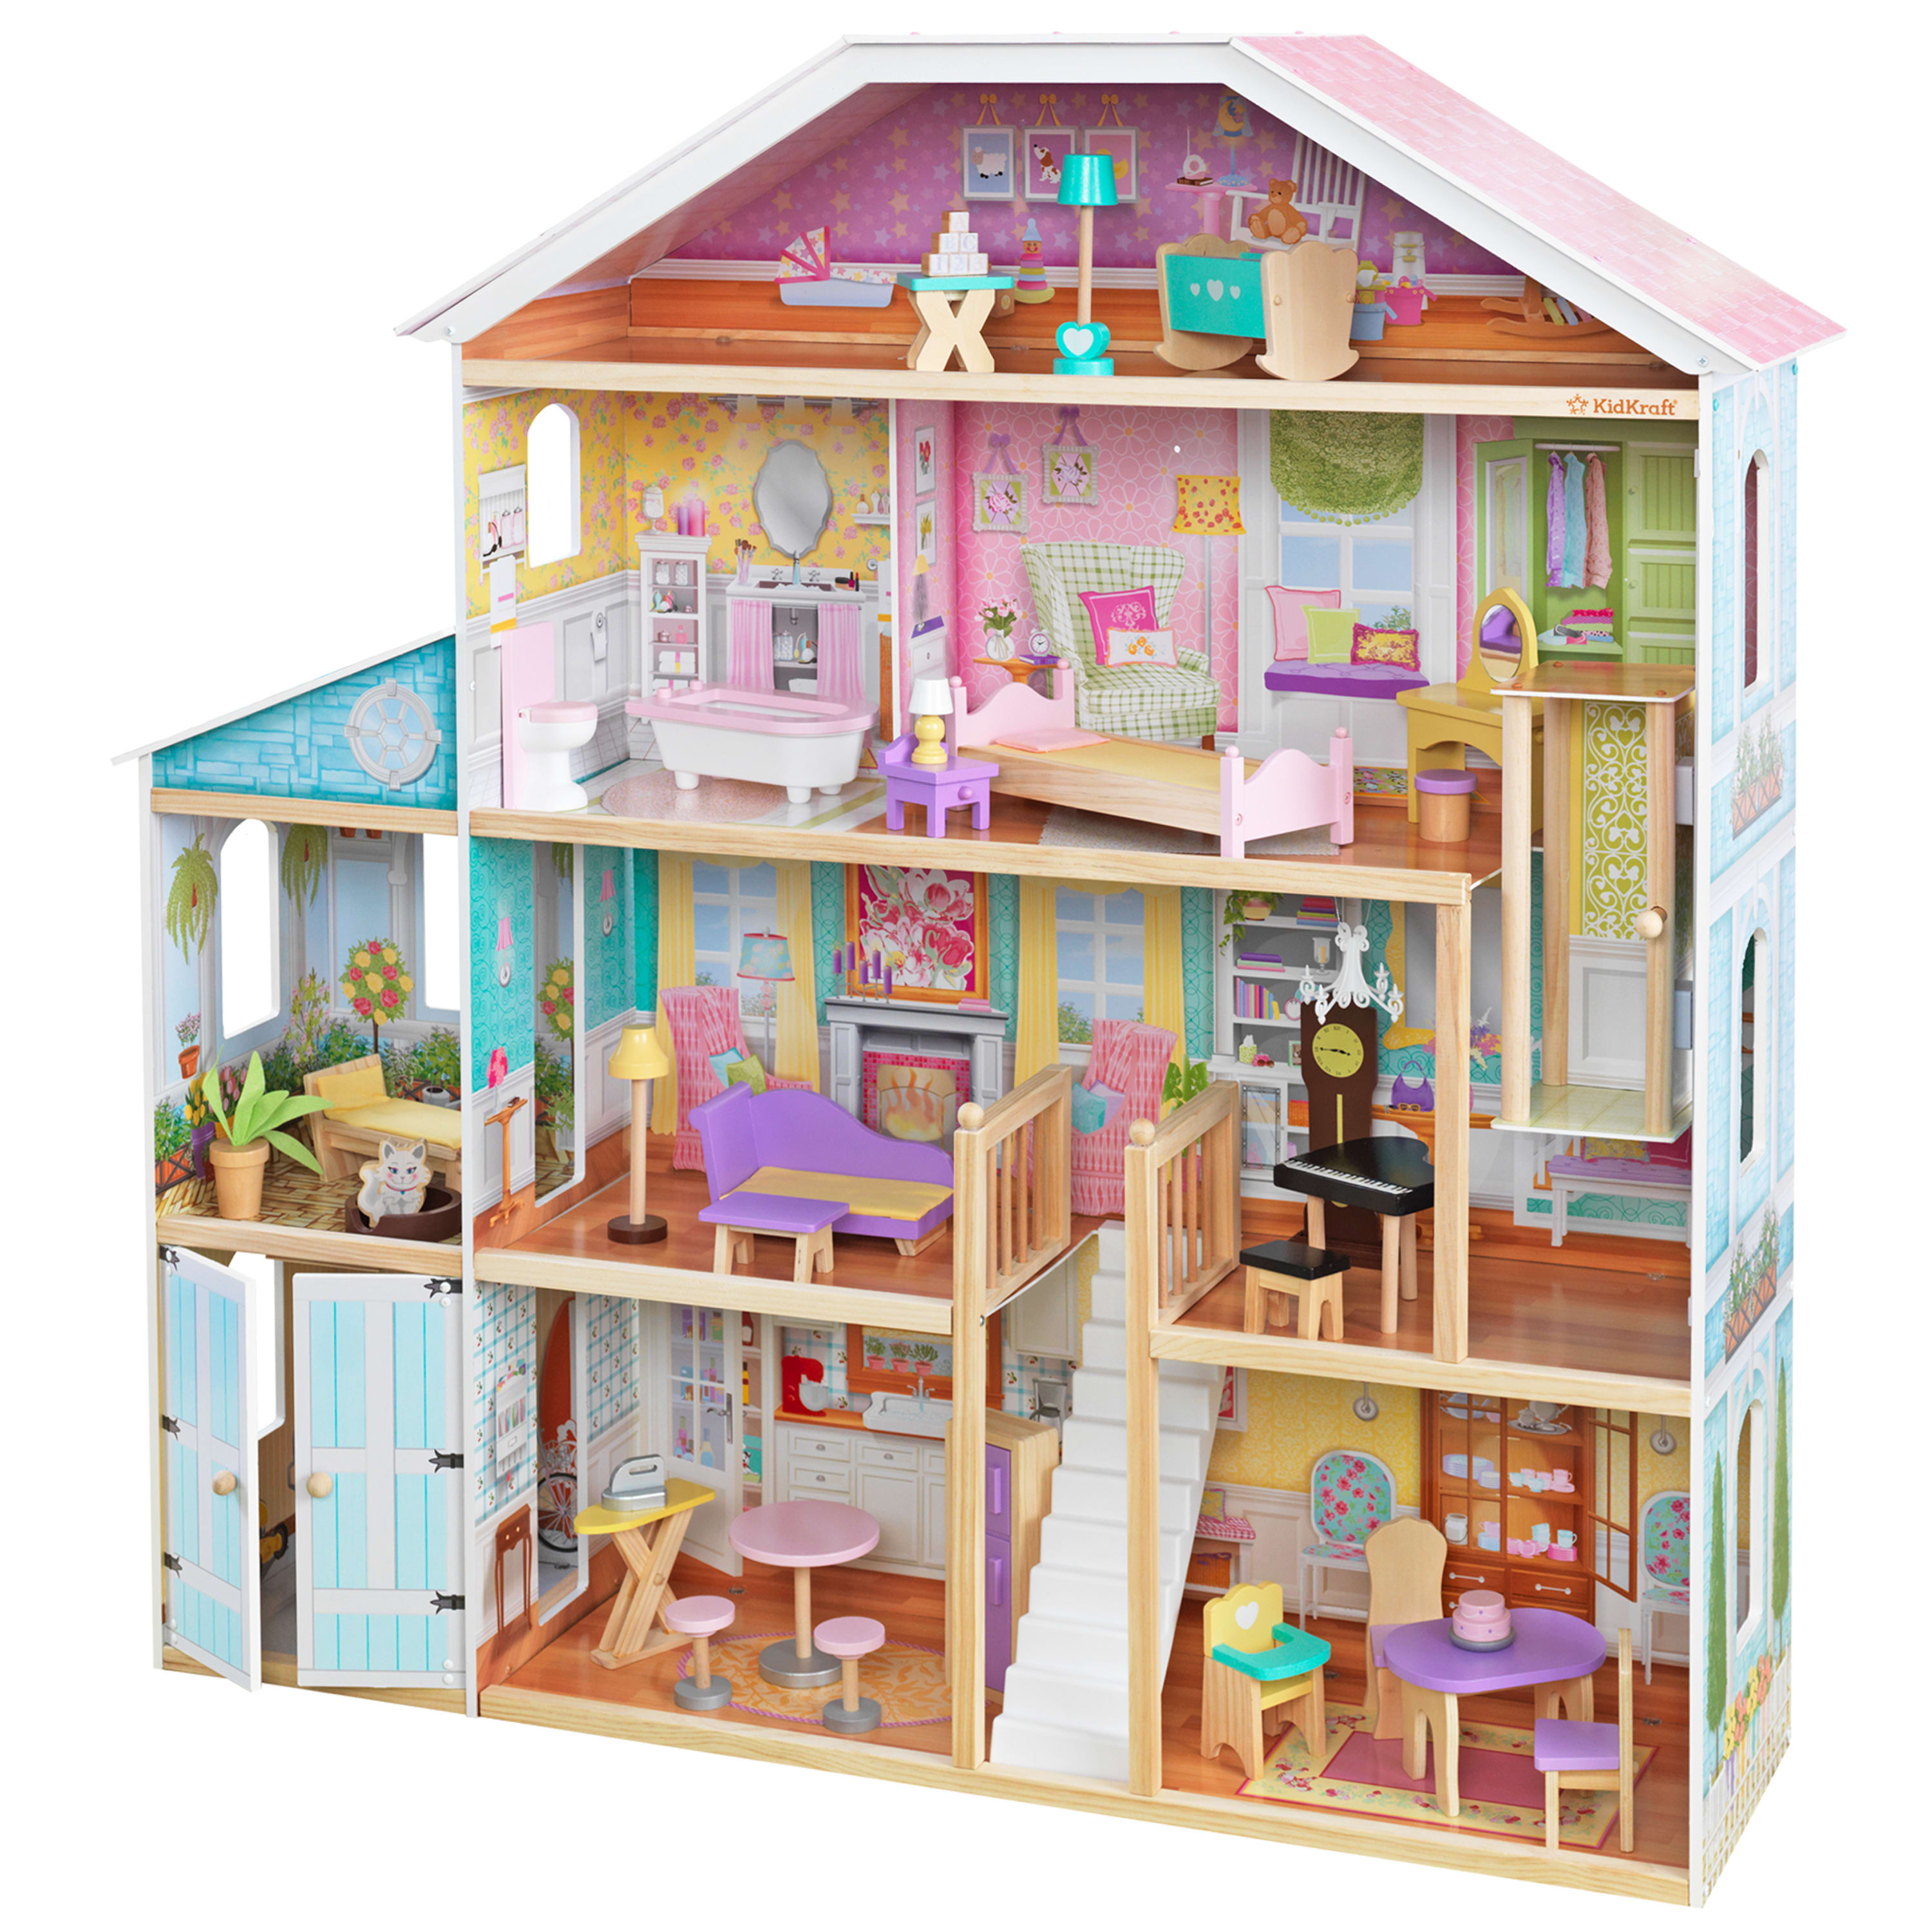 KidKraft Grand View Mansion Wooden Dollhouse with 34 Accessories, Ages 3 and up - image 1 of 14